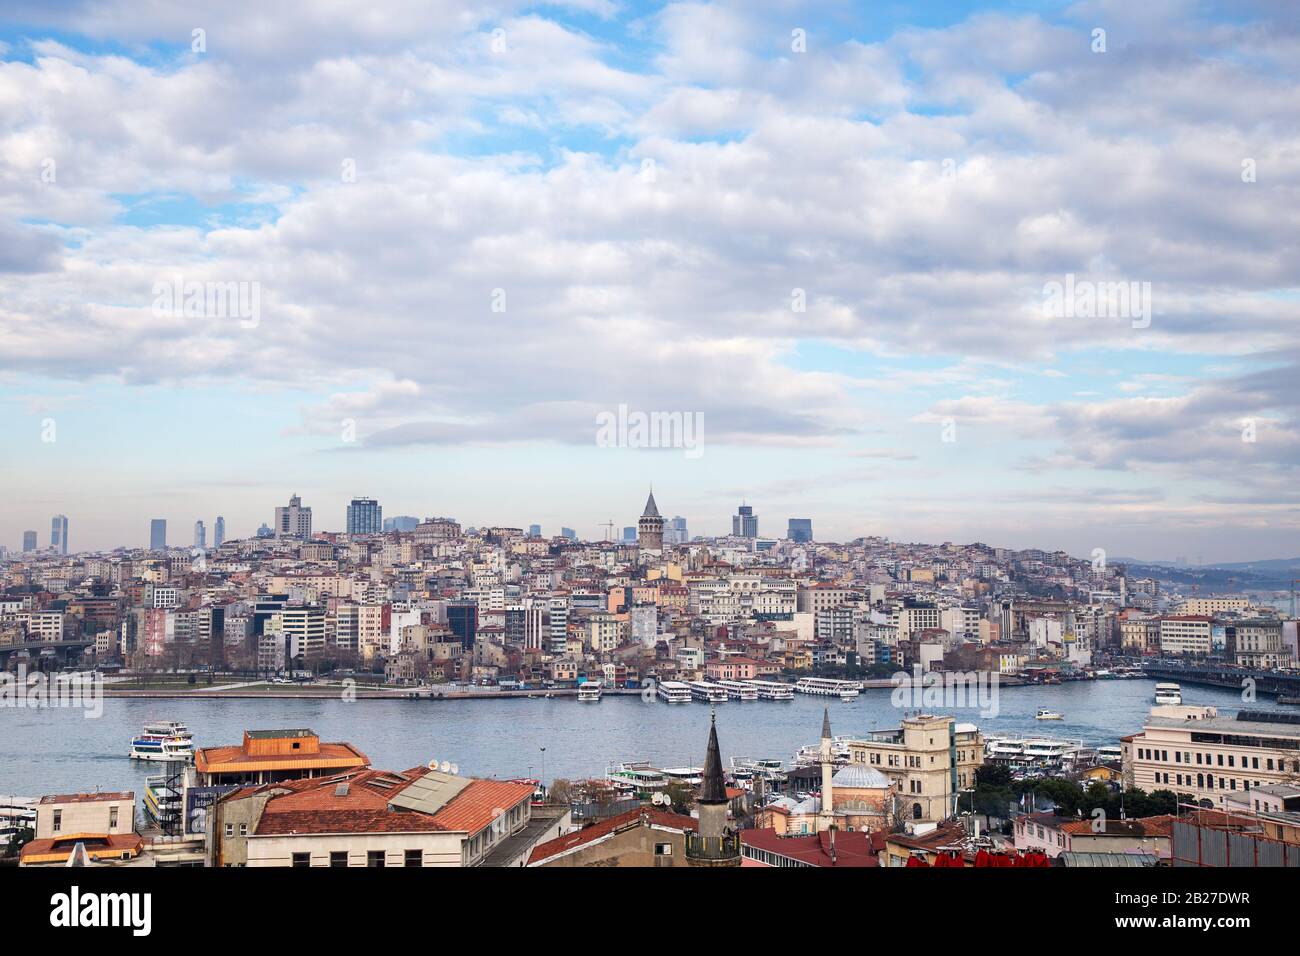 Istanbul / Turkey - 01/20/2019: View of Cityscape with Galata Tower and Golden Horn from garden of the Suleymaniye Mosque. Stock Photo